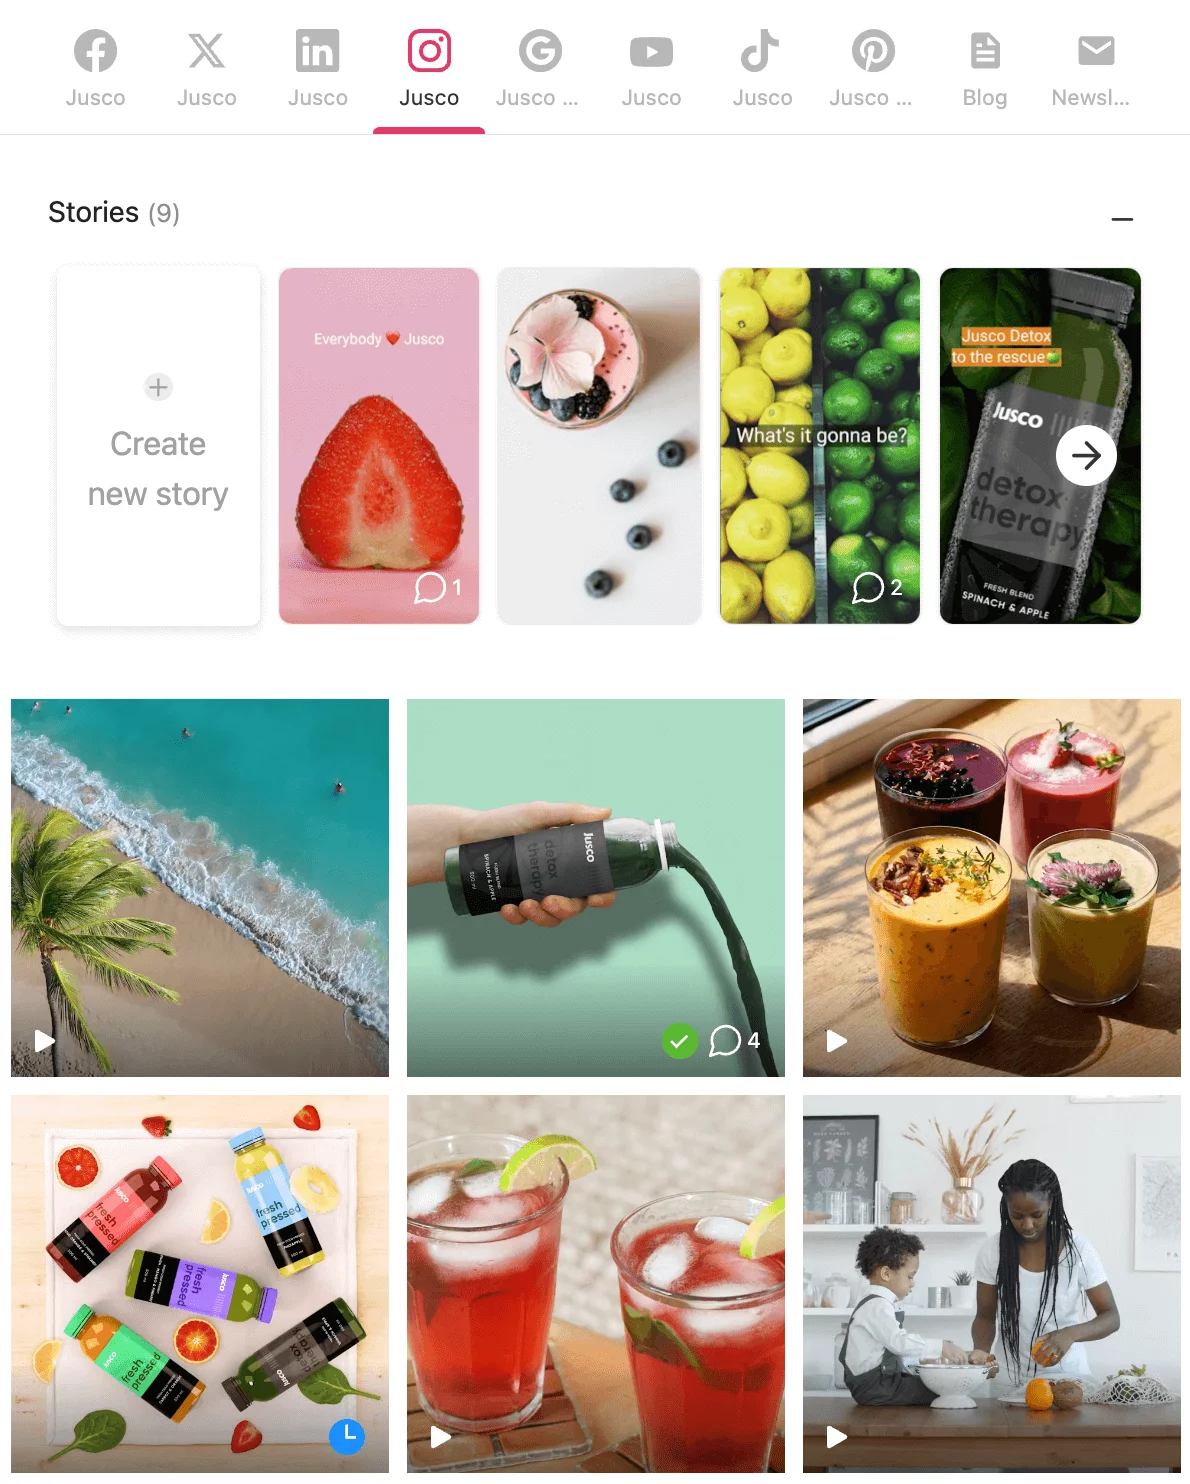 Instagram stories and posts in Planable for Jusco, featuring juices, smoothies, beach scenes, and people preparing drinks.